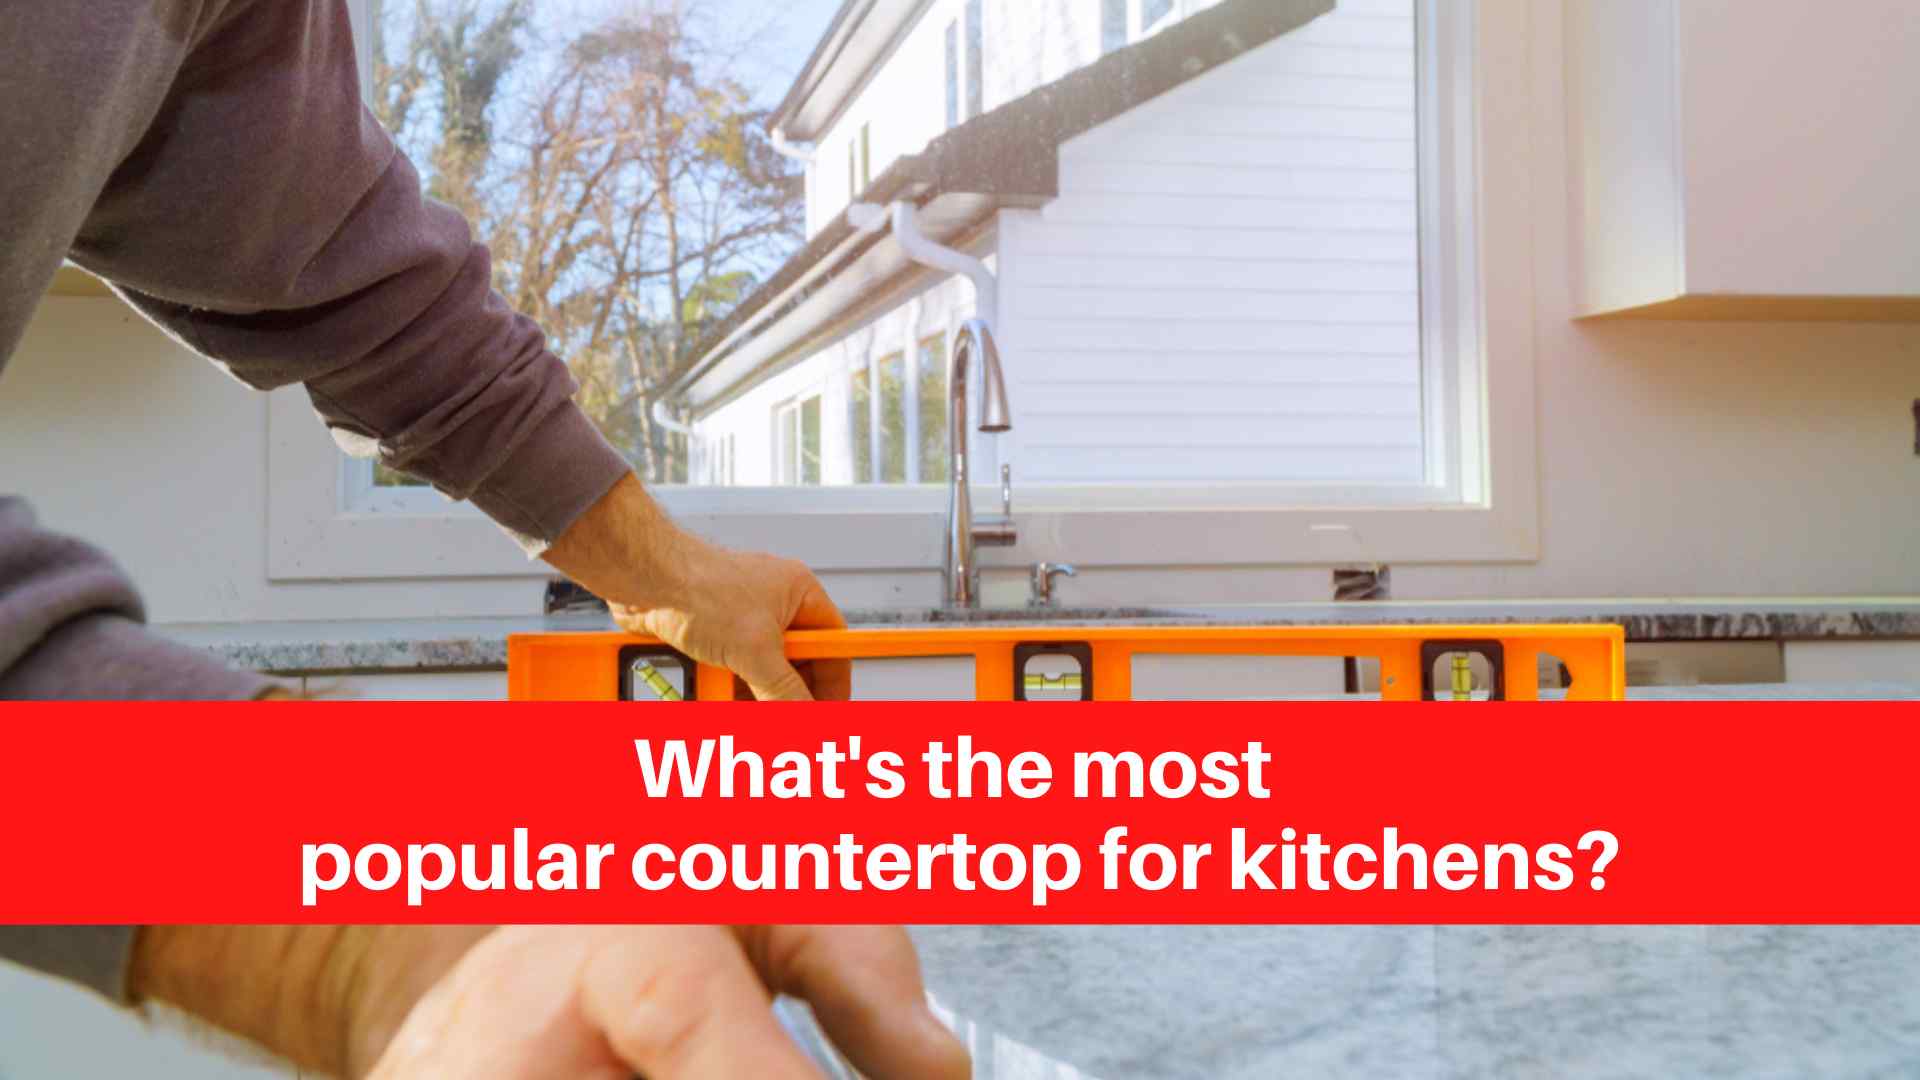 What's the most popular countertop for kitchens